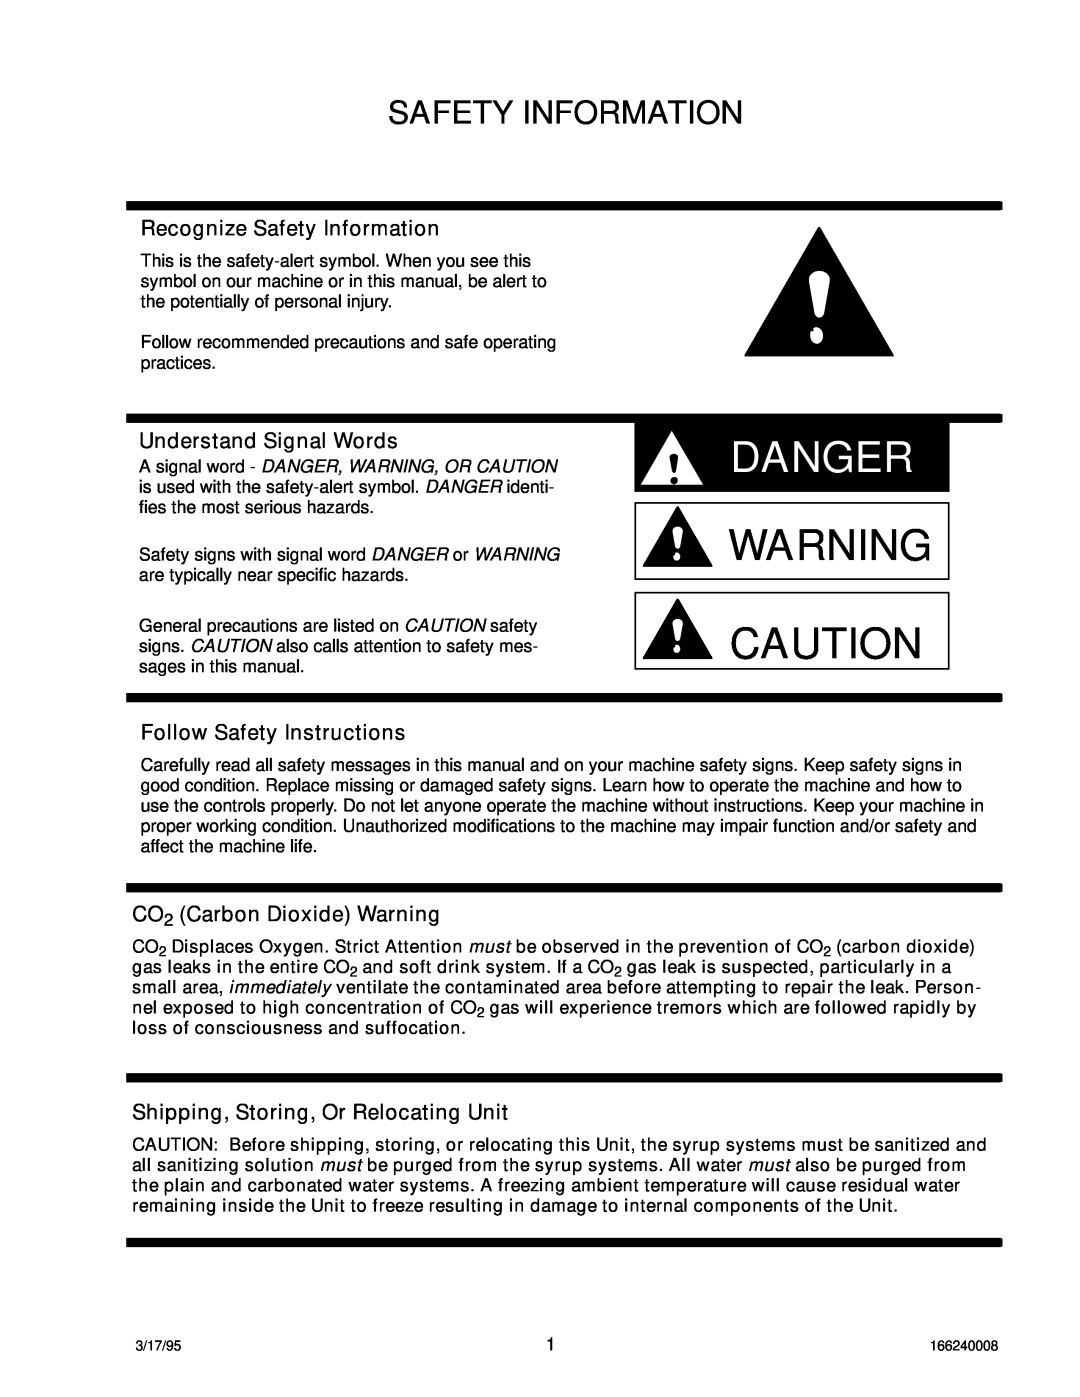 Cornelius 322 manual Recognize Safety Information, Understand Signal Words, Follow Safety Instructions, Danger 